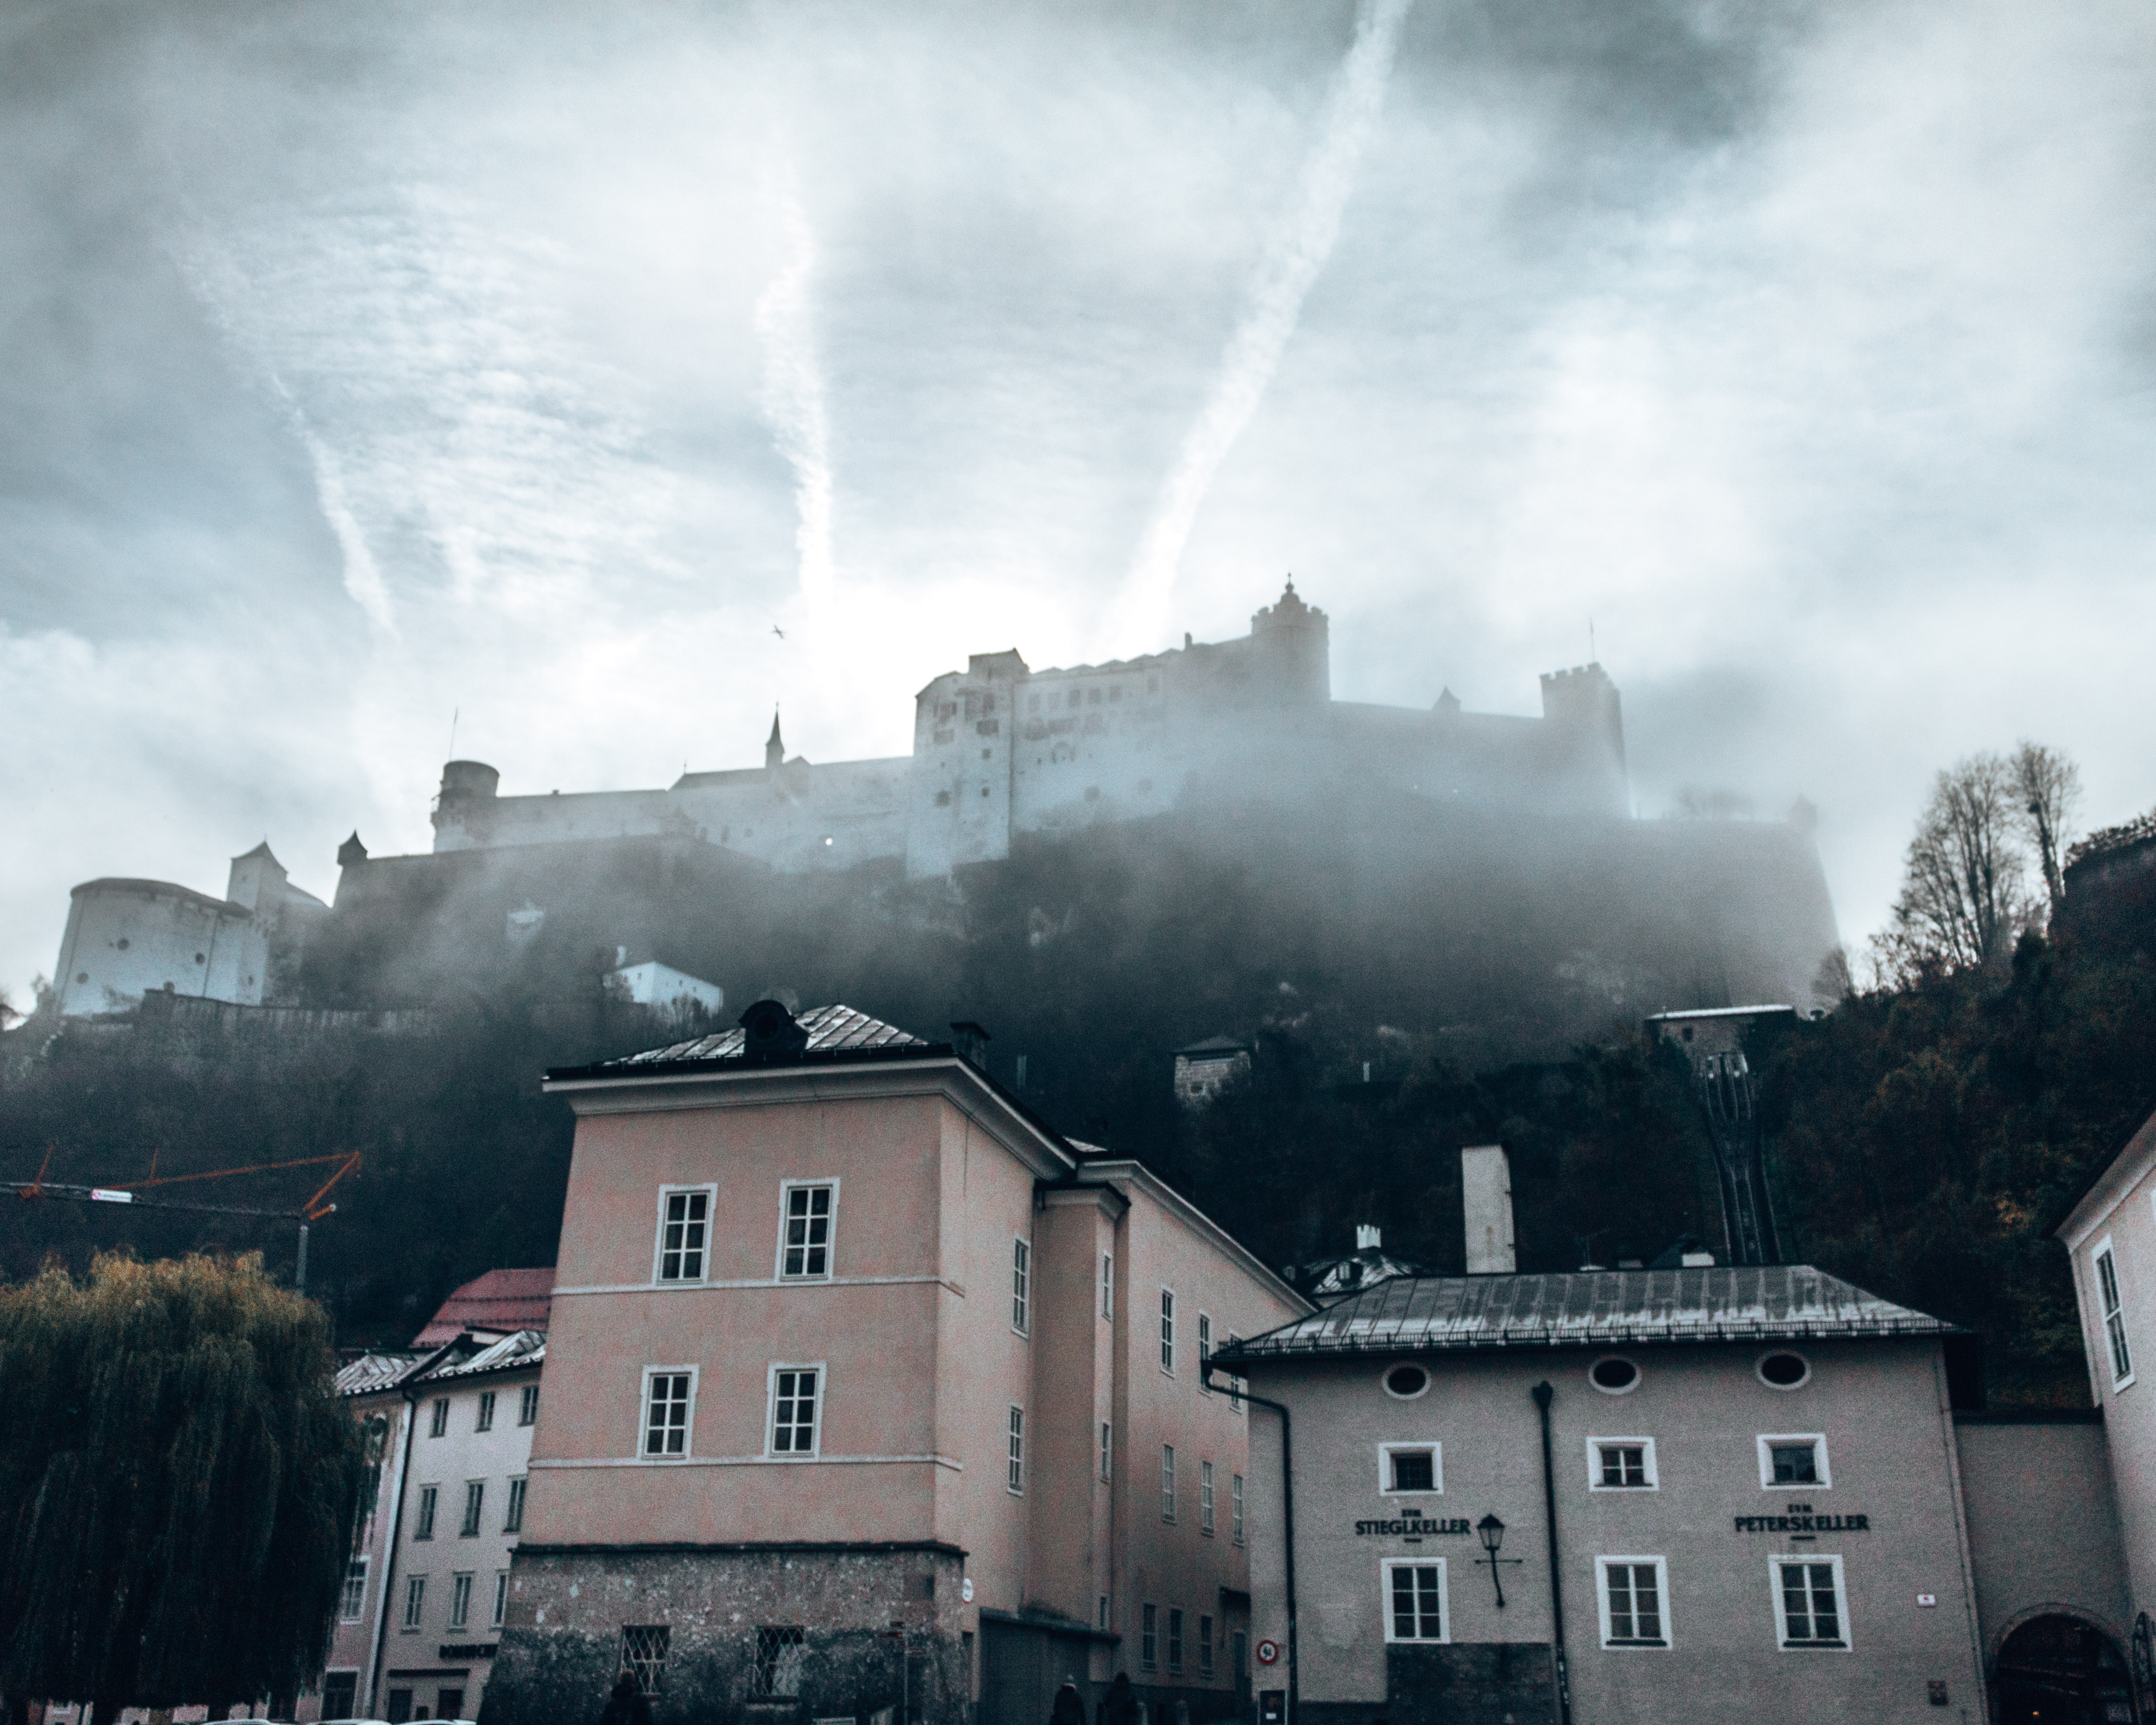 The Hohensalzburg Fortress seen through the early morning fog in Salzburg, Austria. What to do in Salzburg in 2 days in December